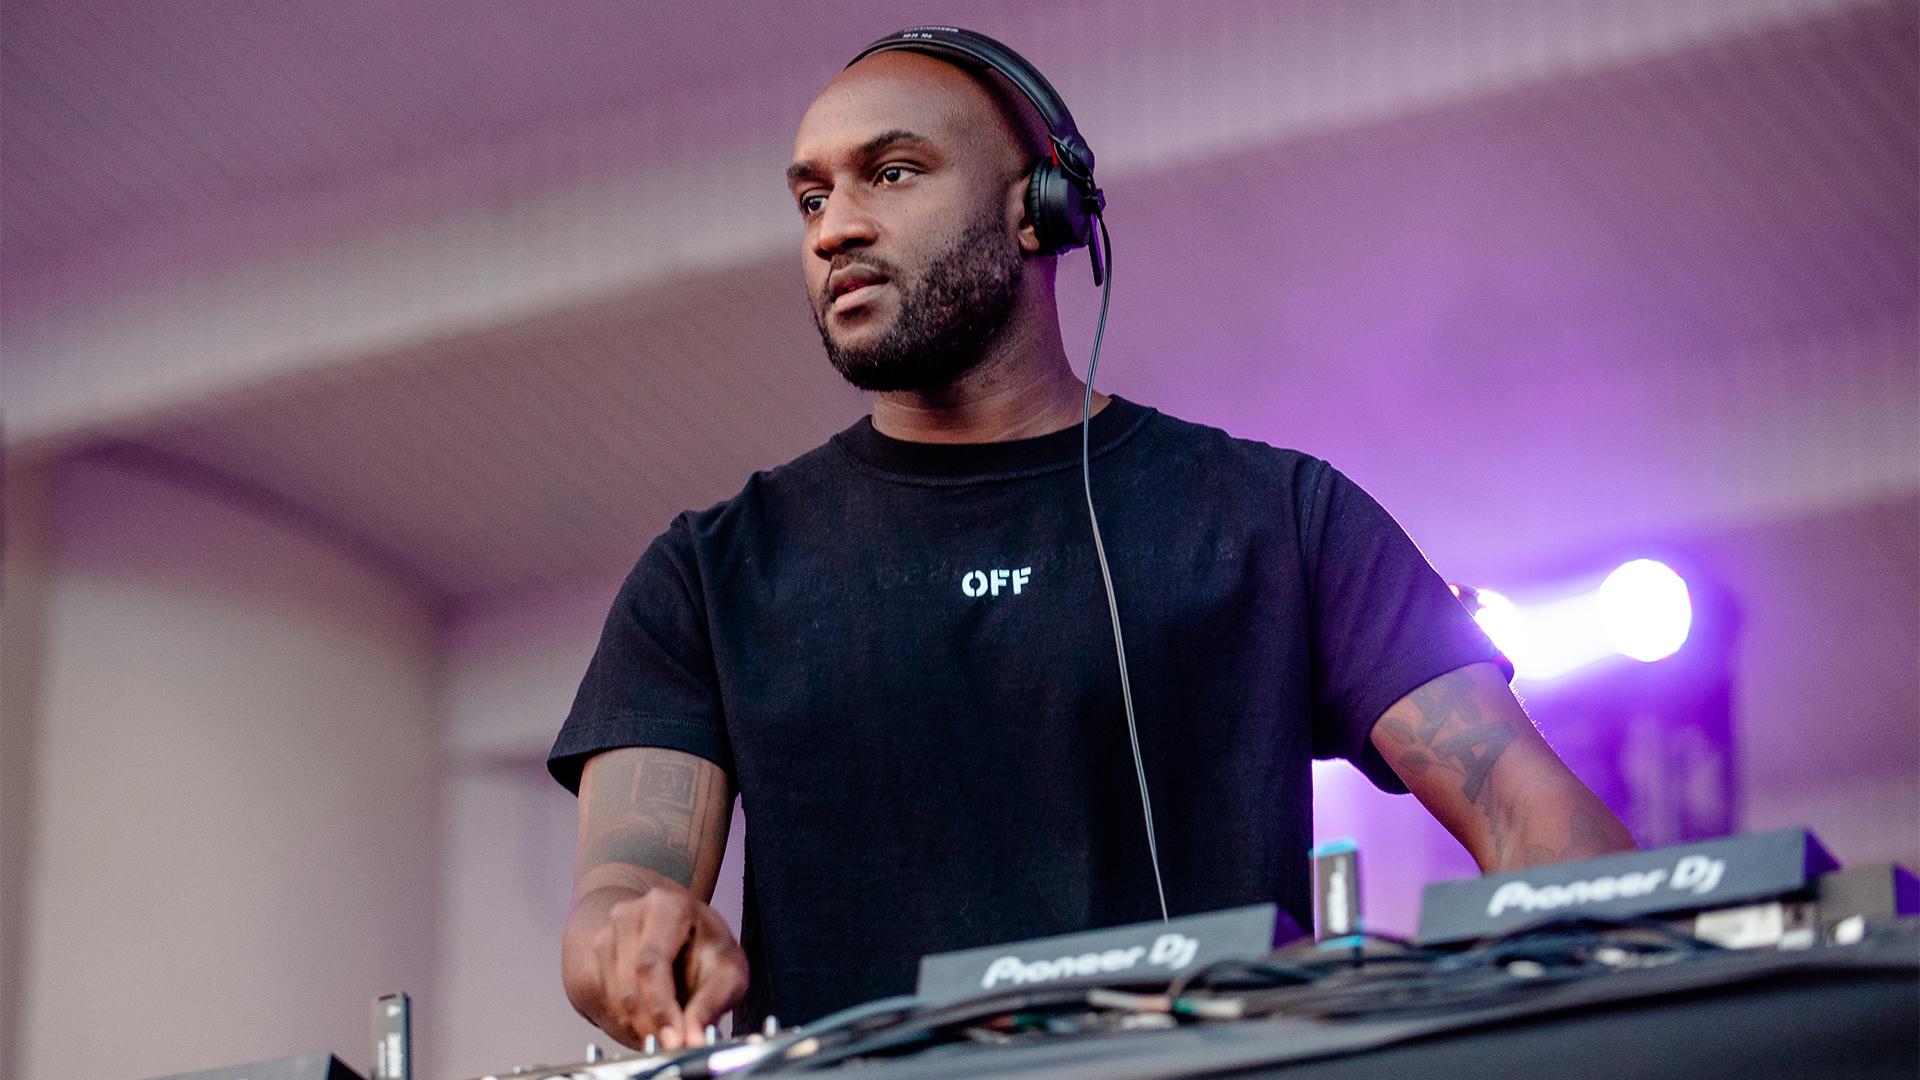 The Life of Virgil Abloh - An Everlasting Memory of a Visionary